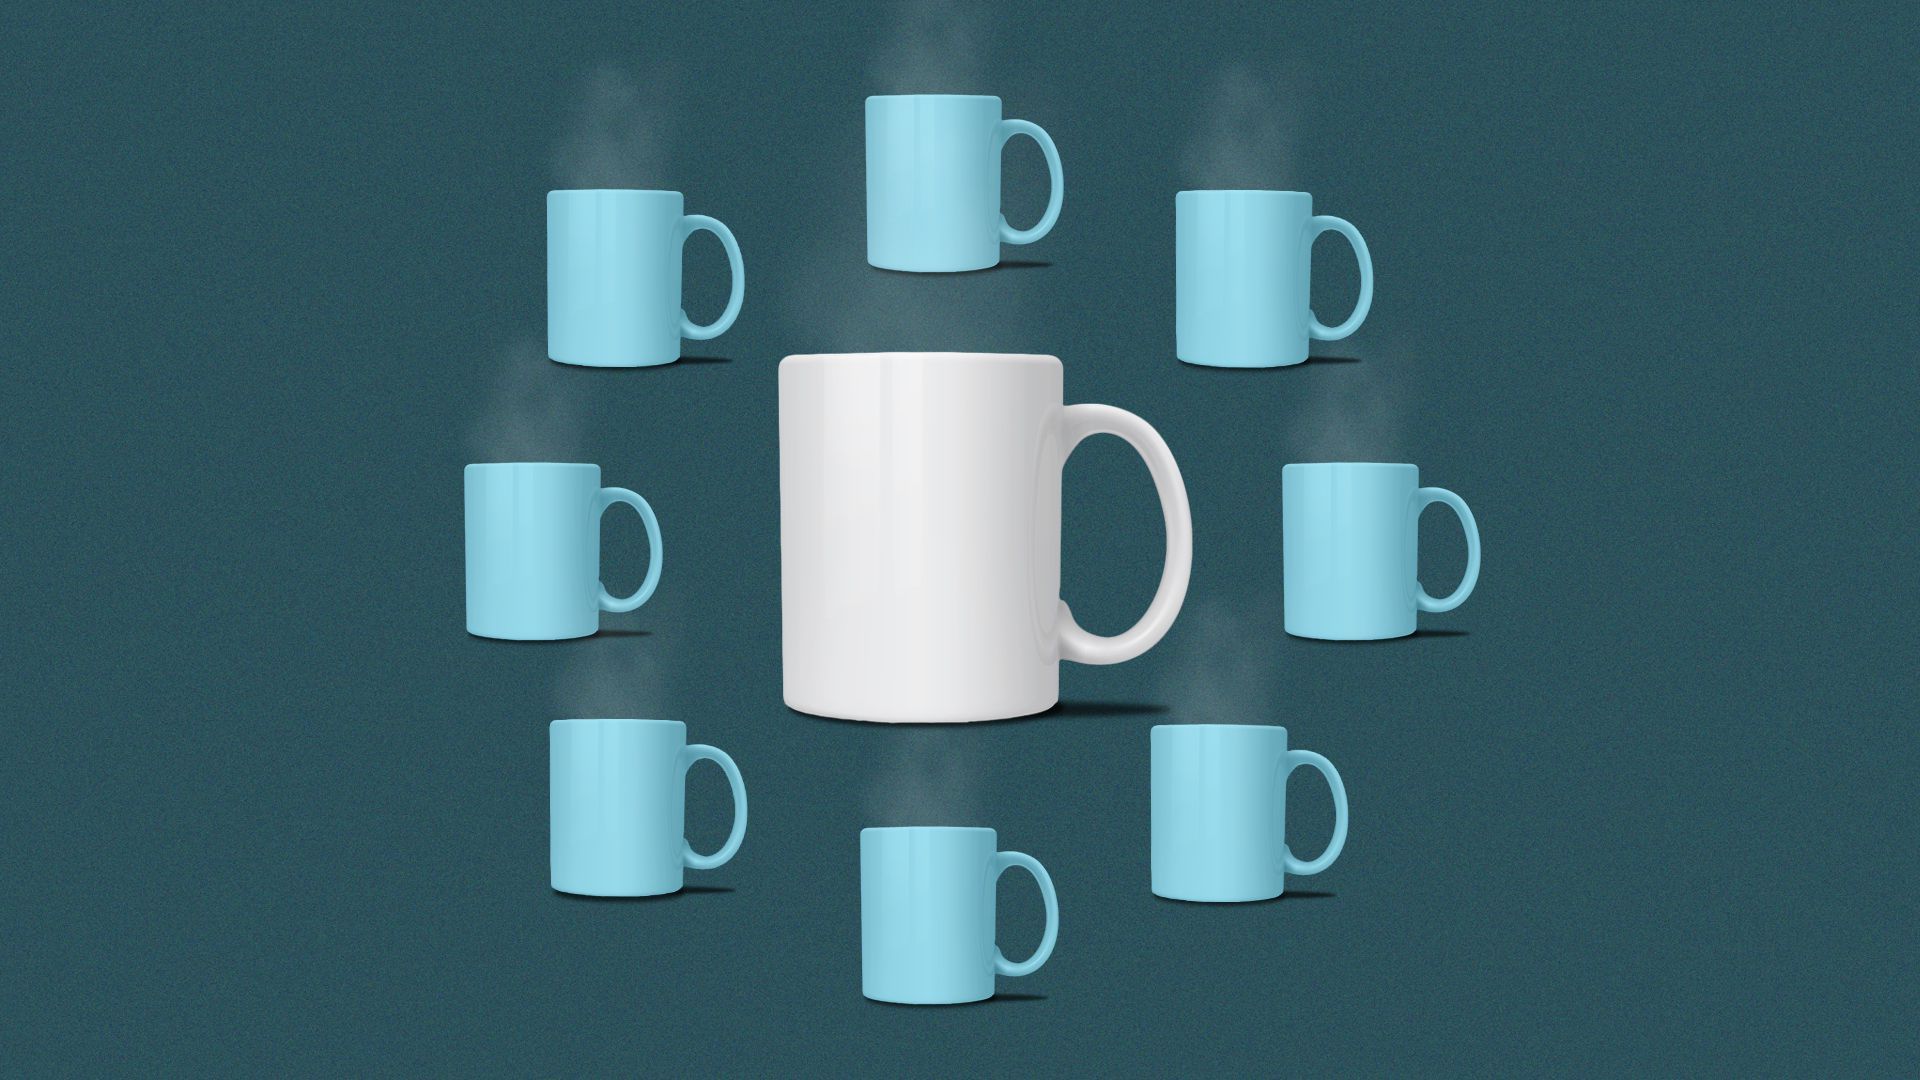 Illustration of a large coffee mug surrounded by a circle of smaller mugs.